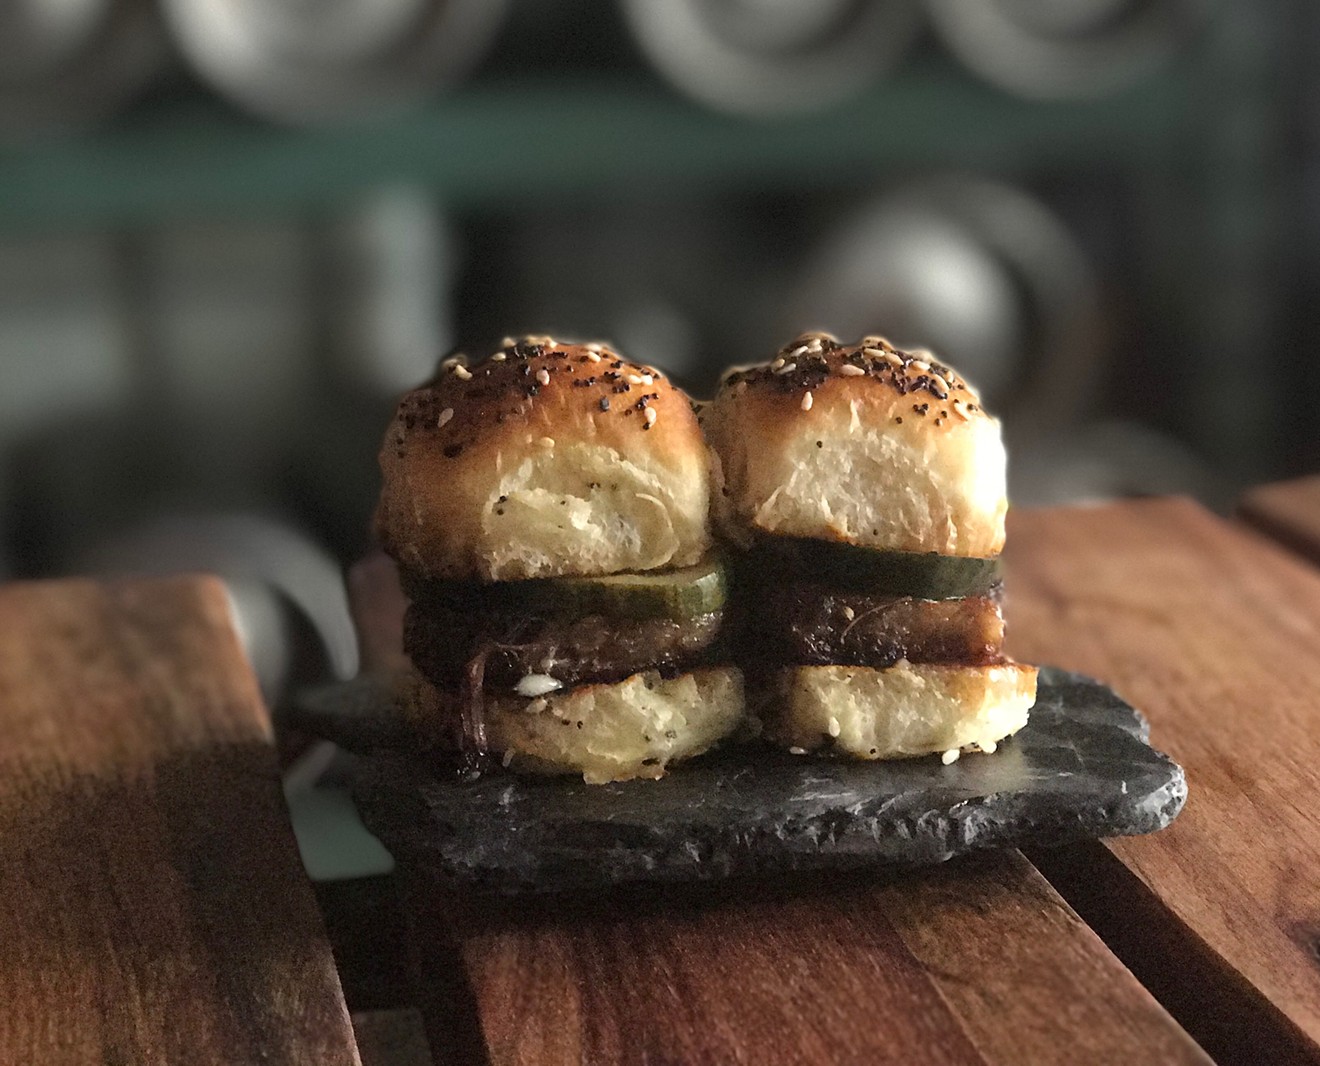 Beef belly sliders on fresh-baked rolls at Small Brewpub ($8).